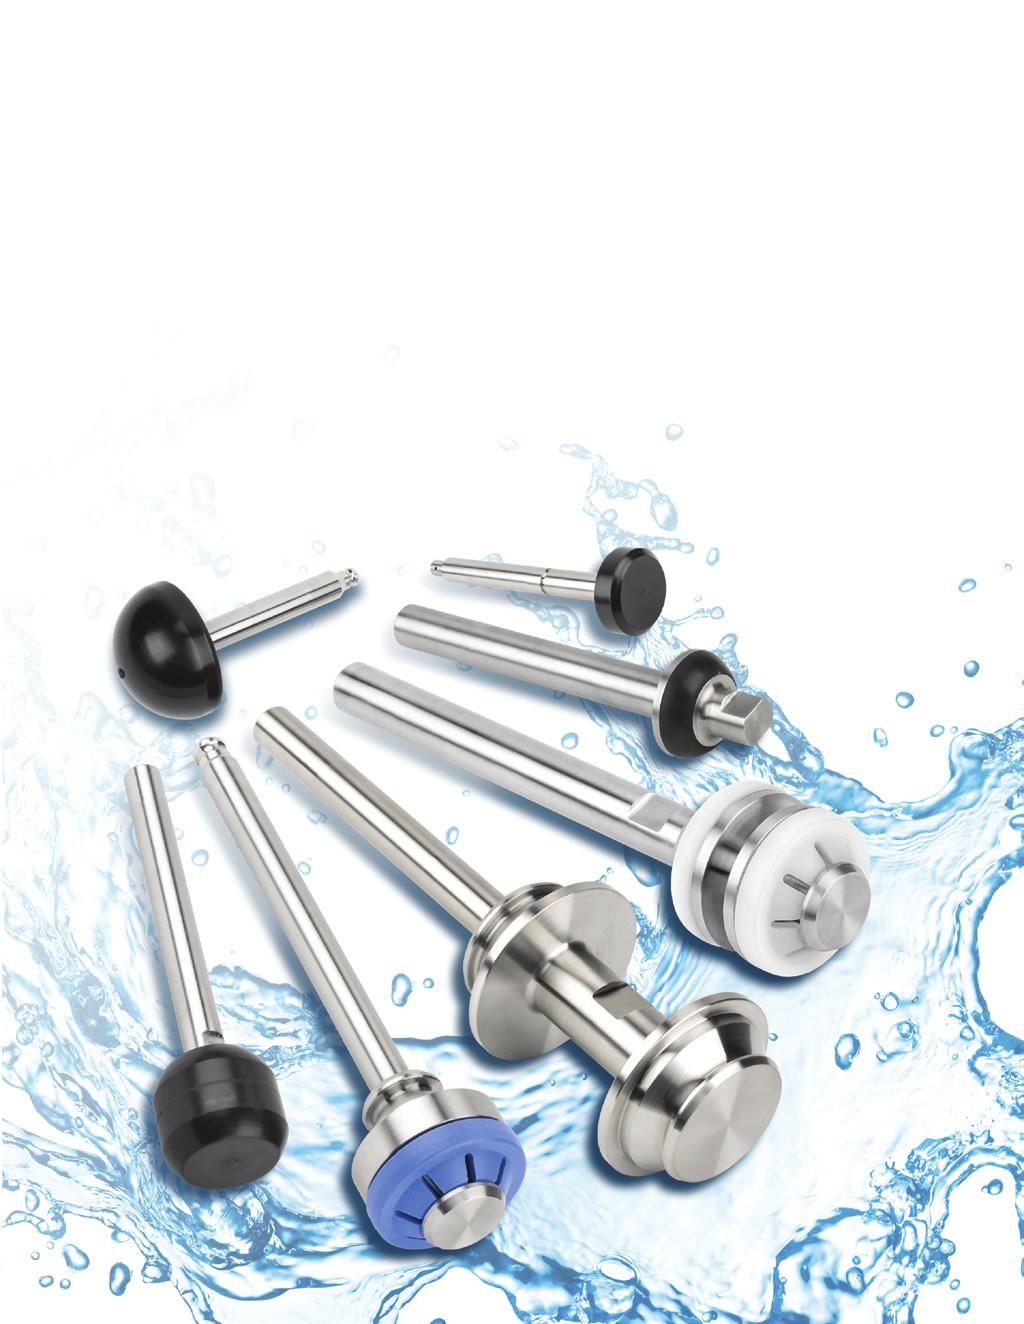 Valve Stems DSO offers a Variety of Rubber Coated, PTFE and Stainless Steel Replacement Valve Stems.